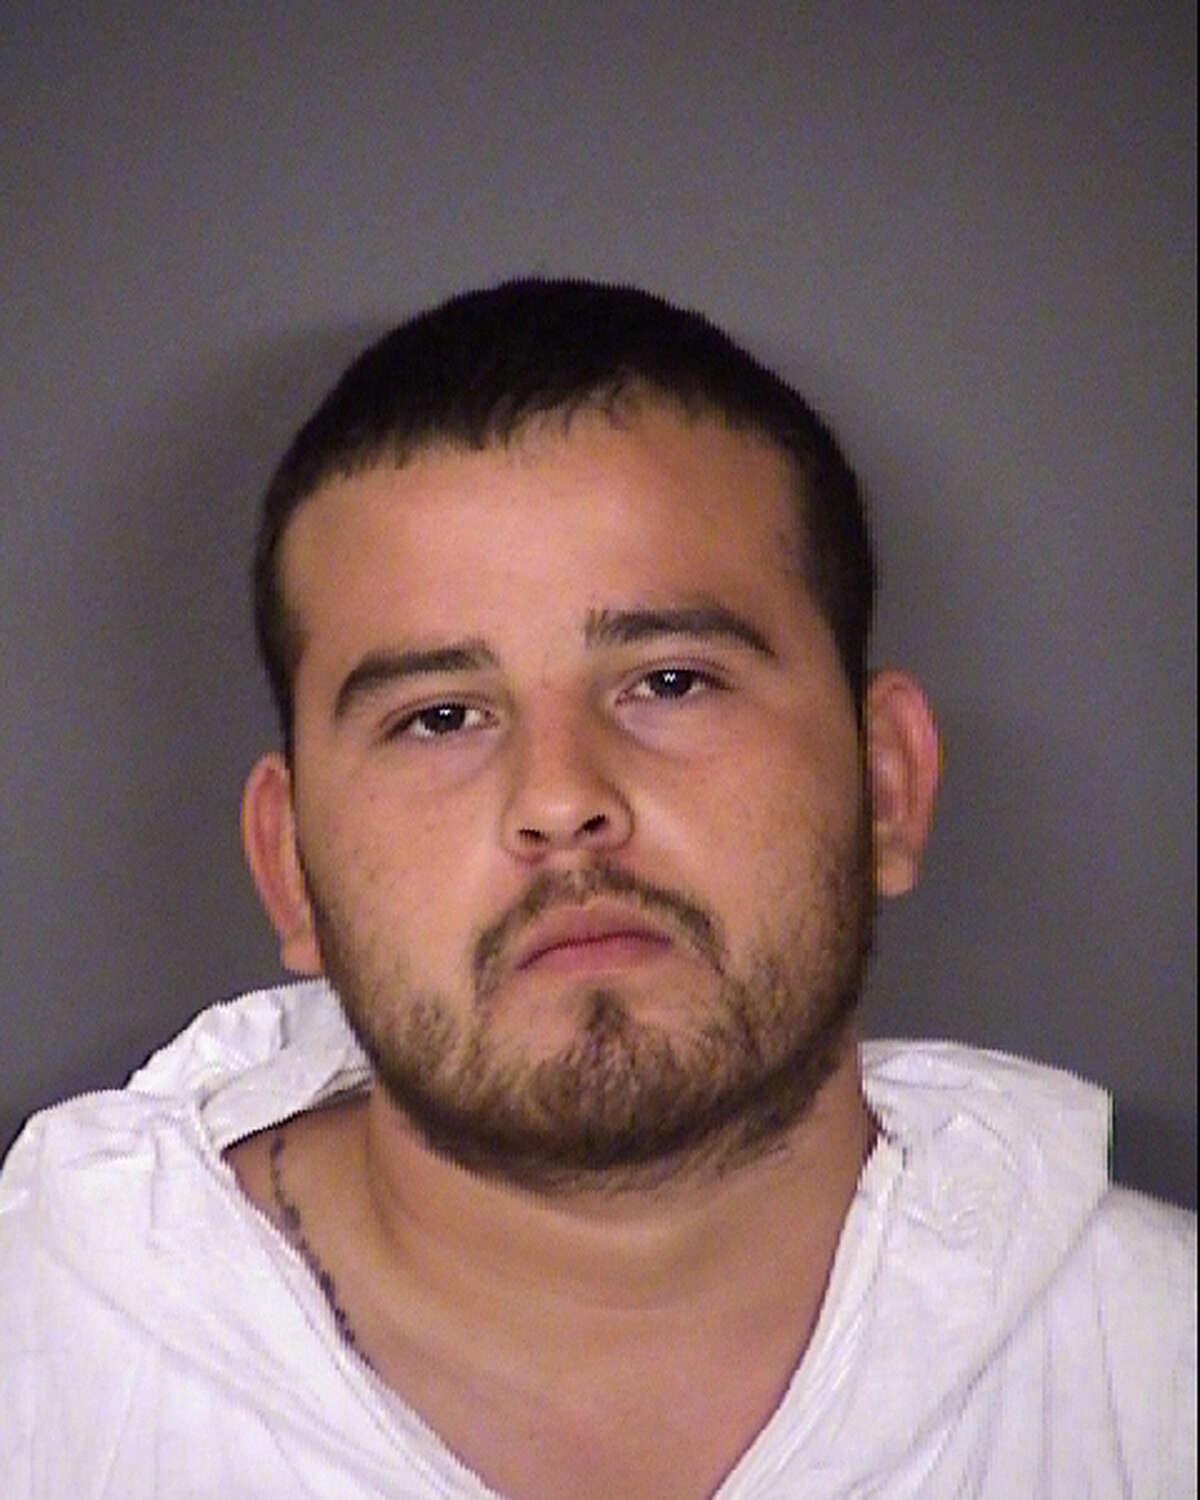 Juan Huerta, 22, faces a charge of murder according to the San Antonio Police Department.